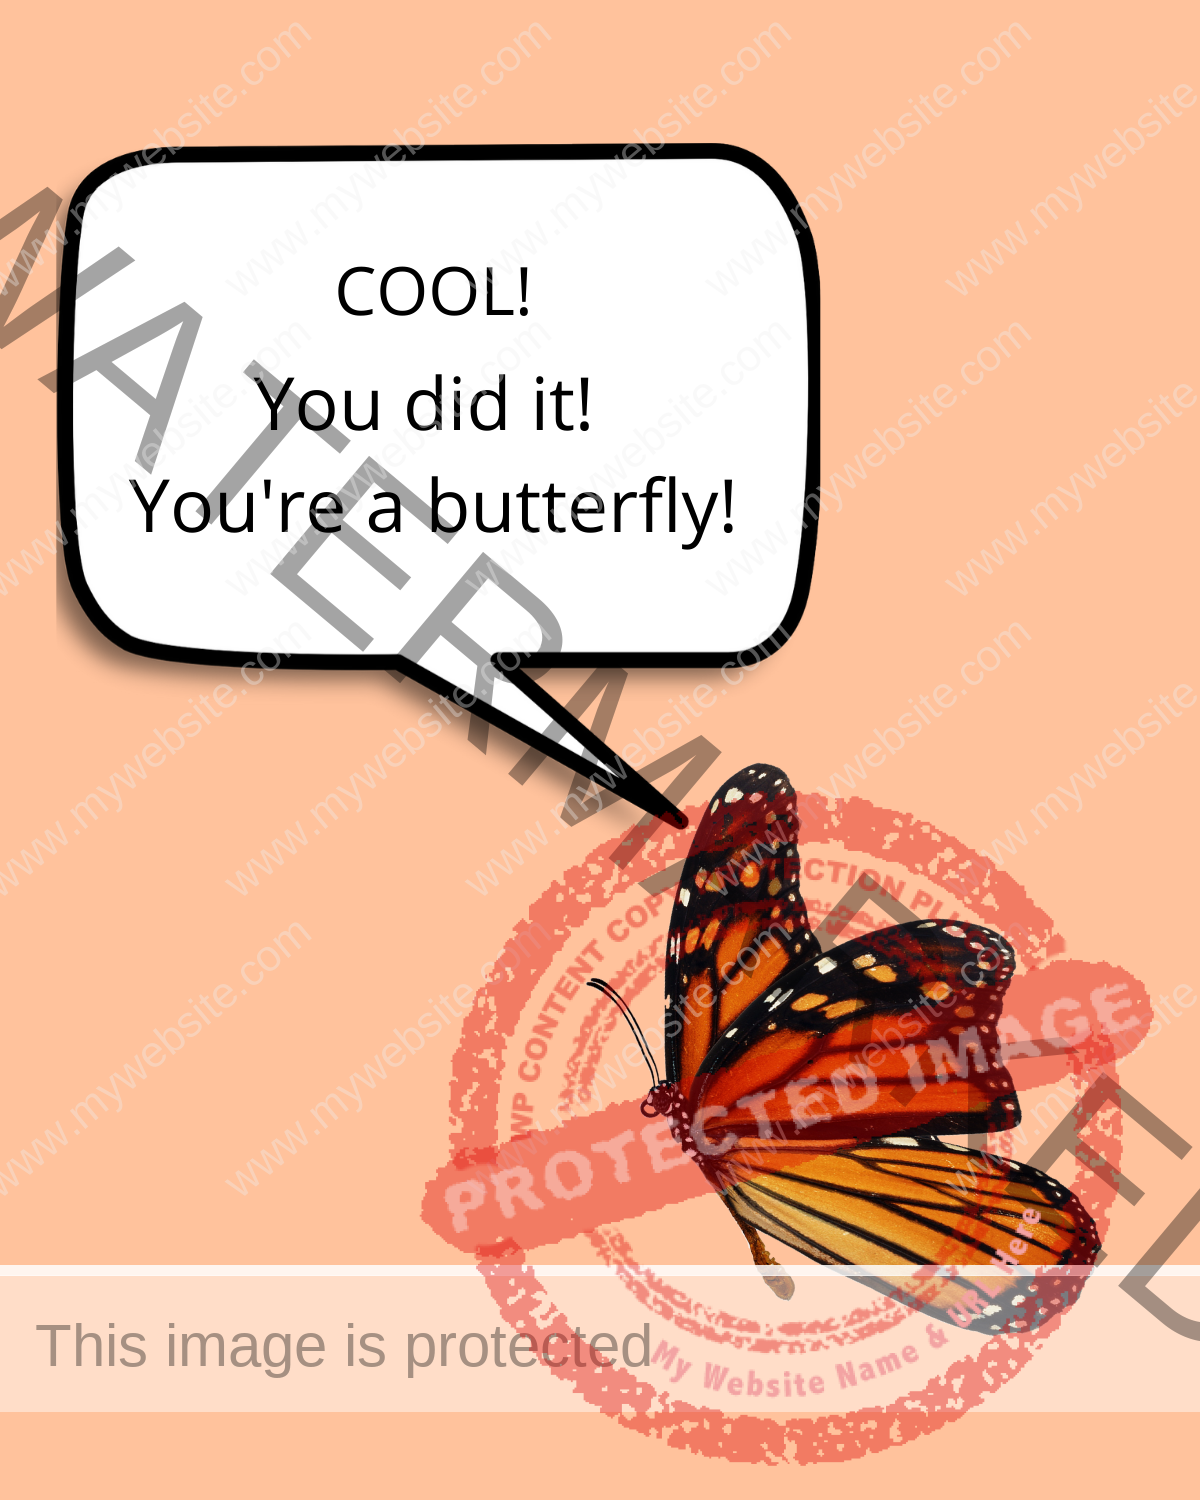 Monarch Butterfly Lifecycle Cartoon_ You're a butterfly!